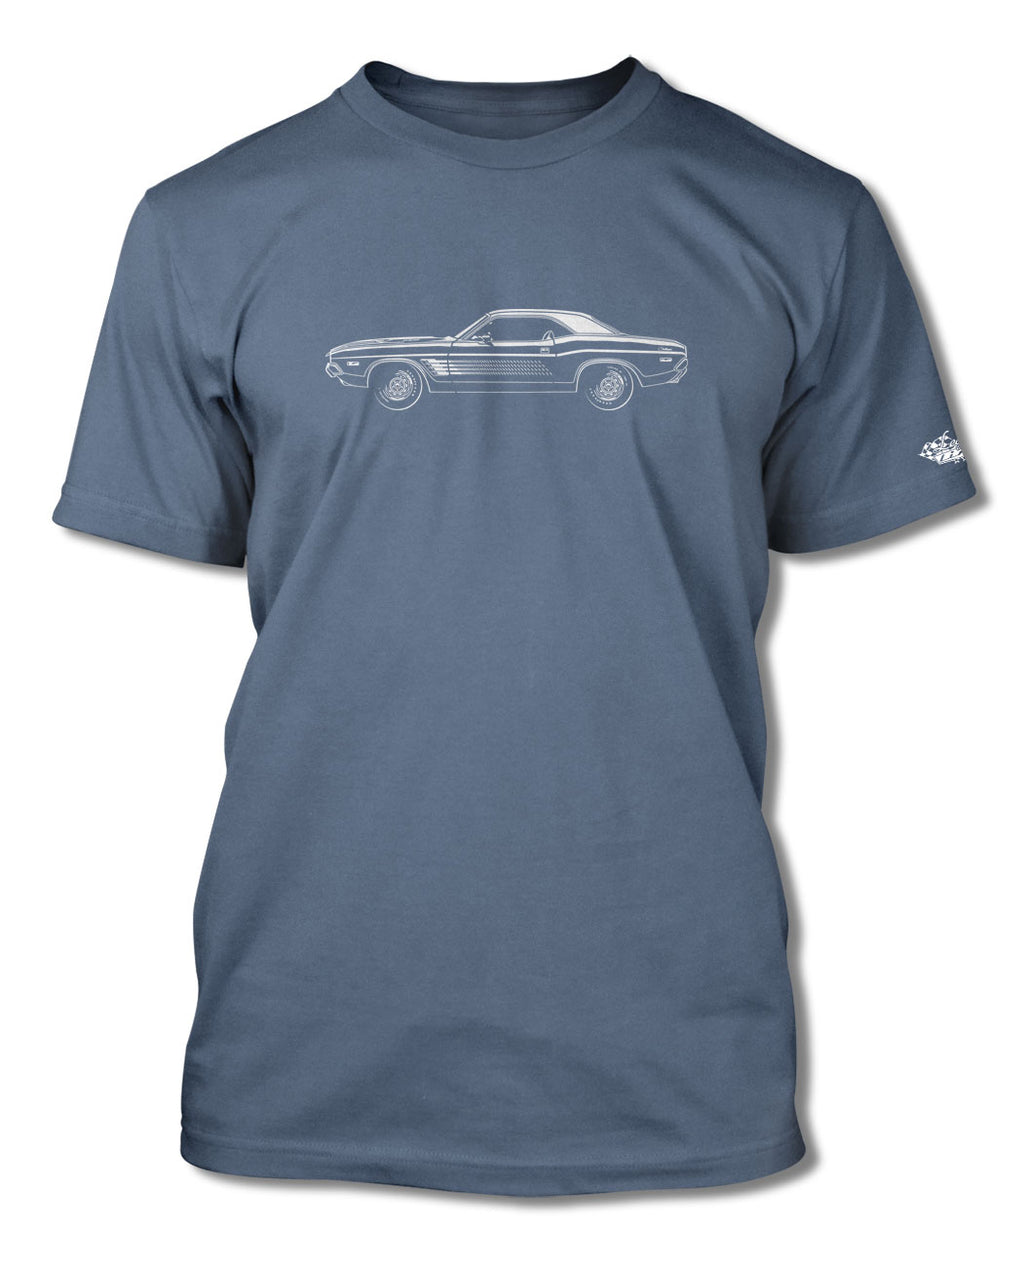 1972 Dodge Challenger Rallye with Stripes Hardtop T-Shirt - Men - Side View